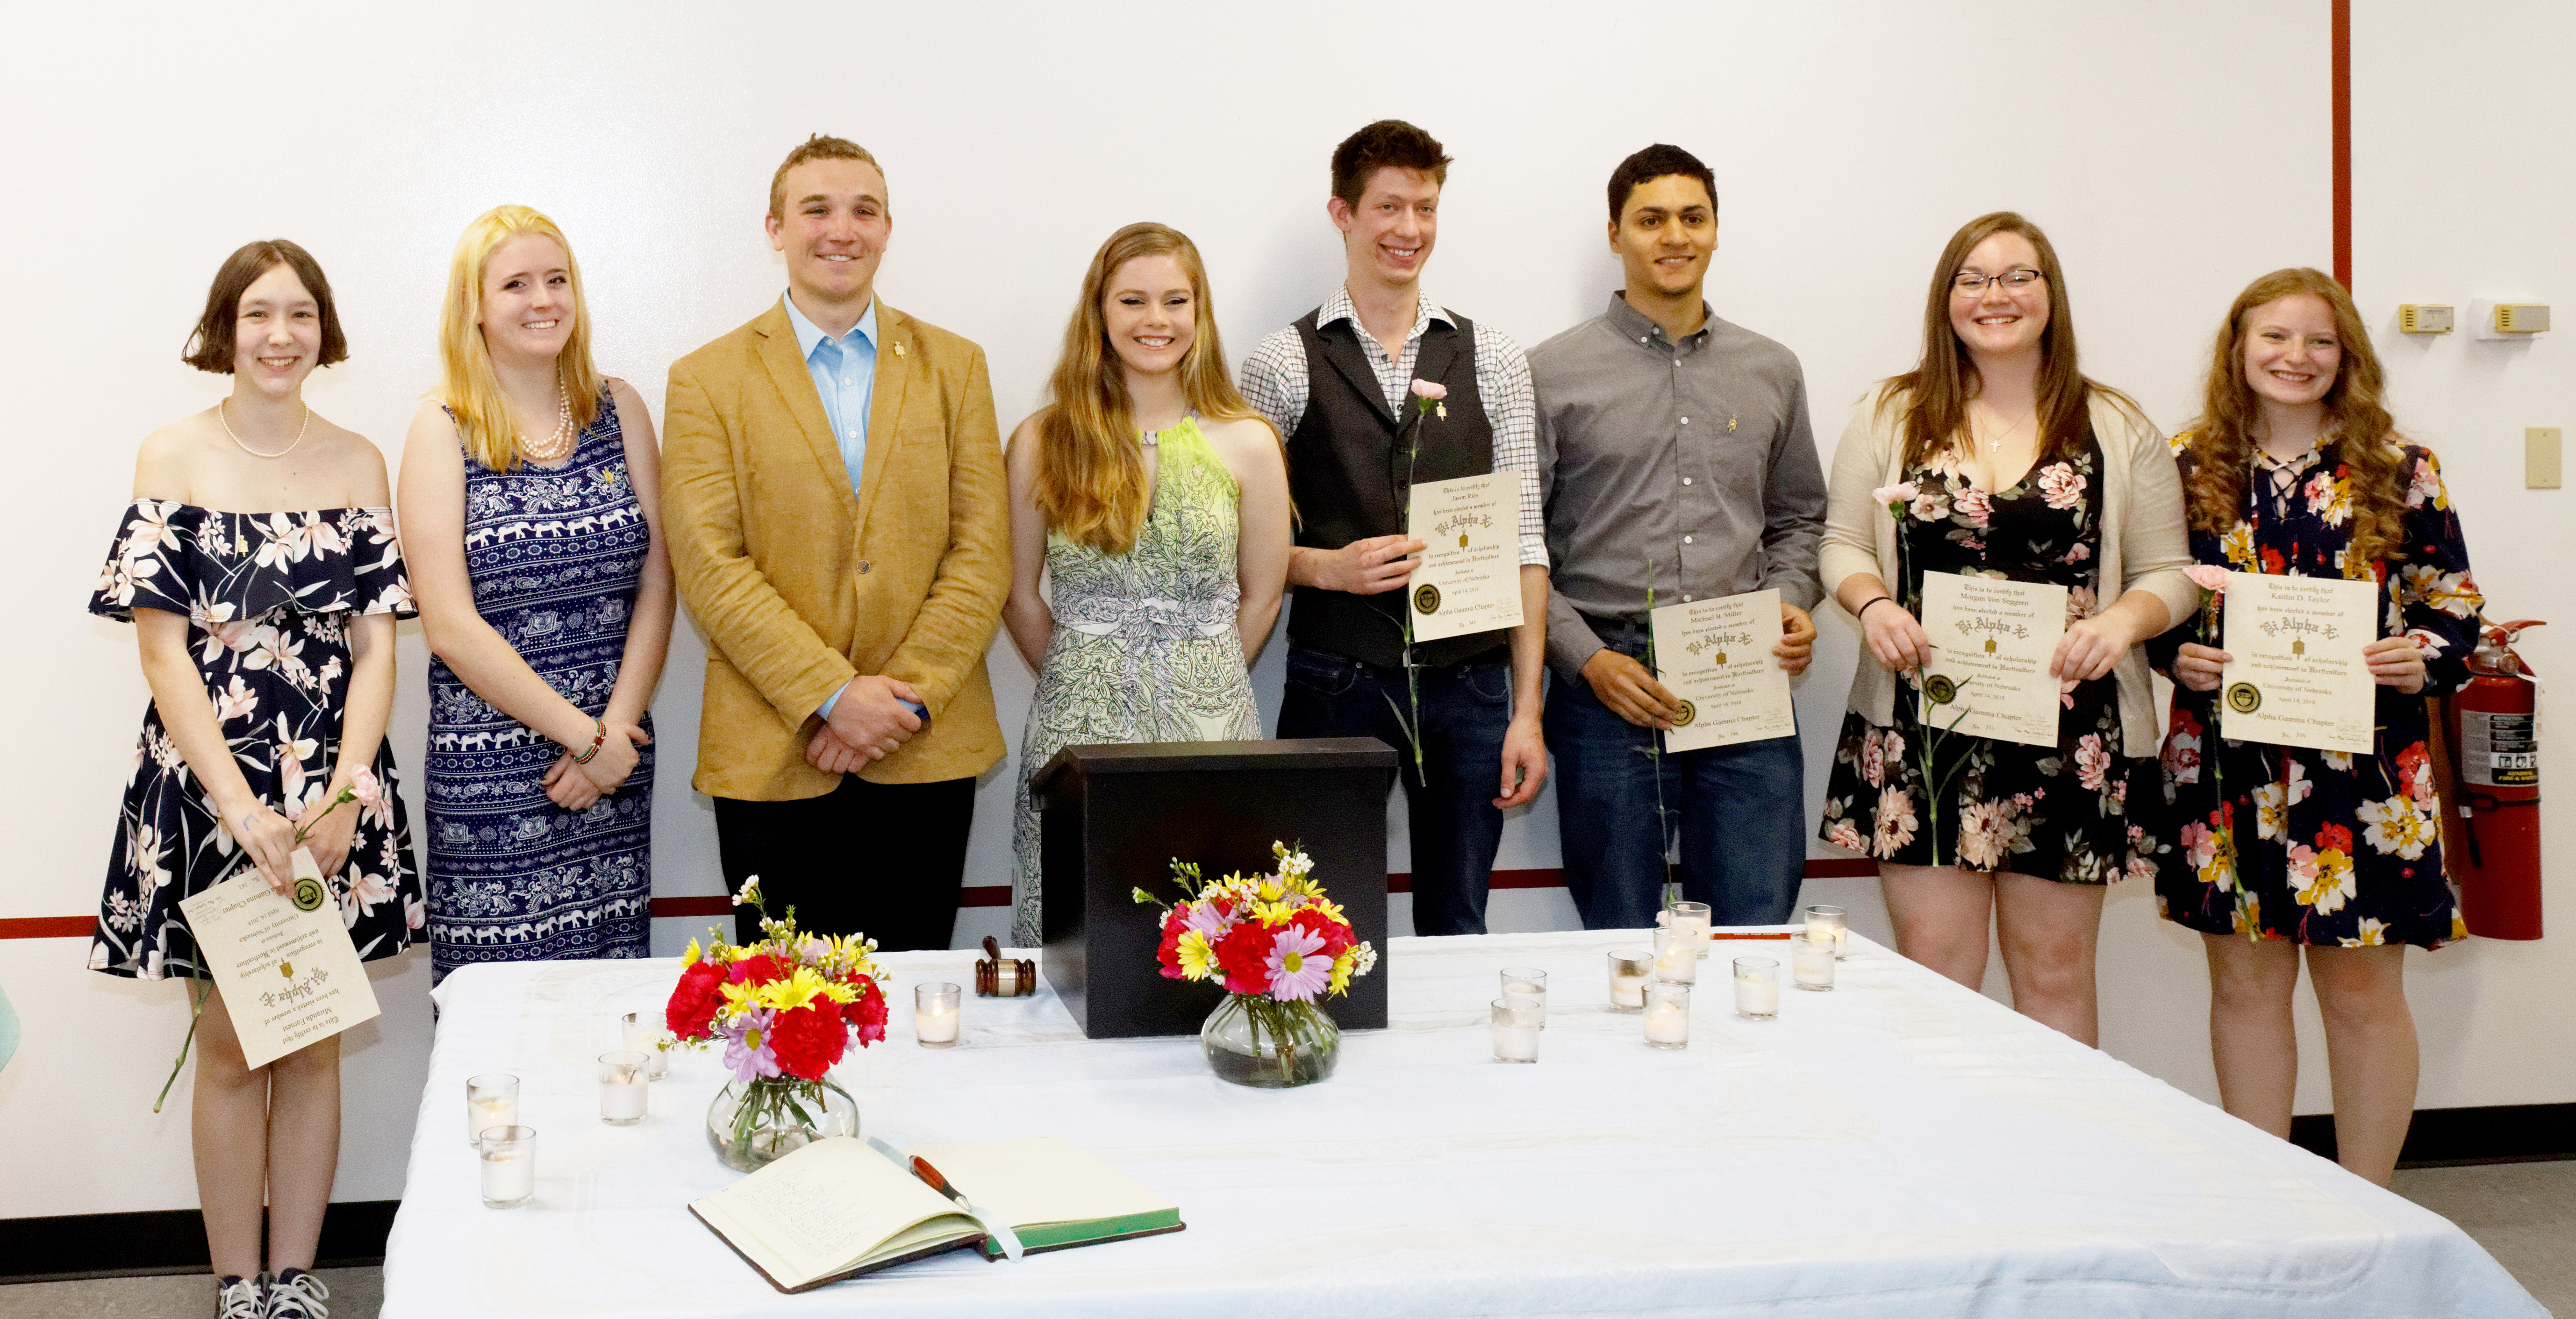 Amanda Earnest (from left), Zoe Gildersleeve, Ben Searl, Olivia Fiala, Jason Ries, Michael Miller, Morgan Von Seggern and Kaitlin Taylor are inducted into Pi Alpha Xi. Not pictured is Alexander Monette.  |  Courtesy Luqi Li